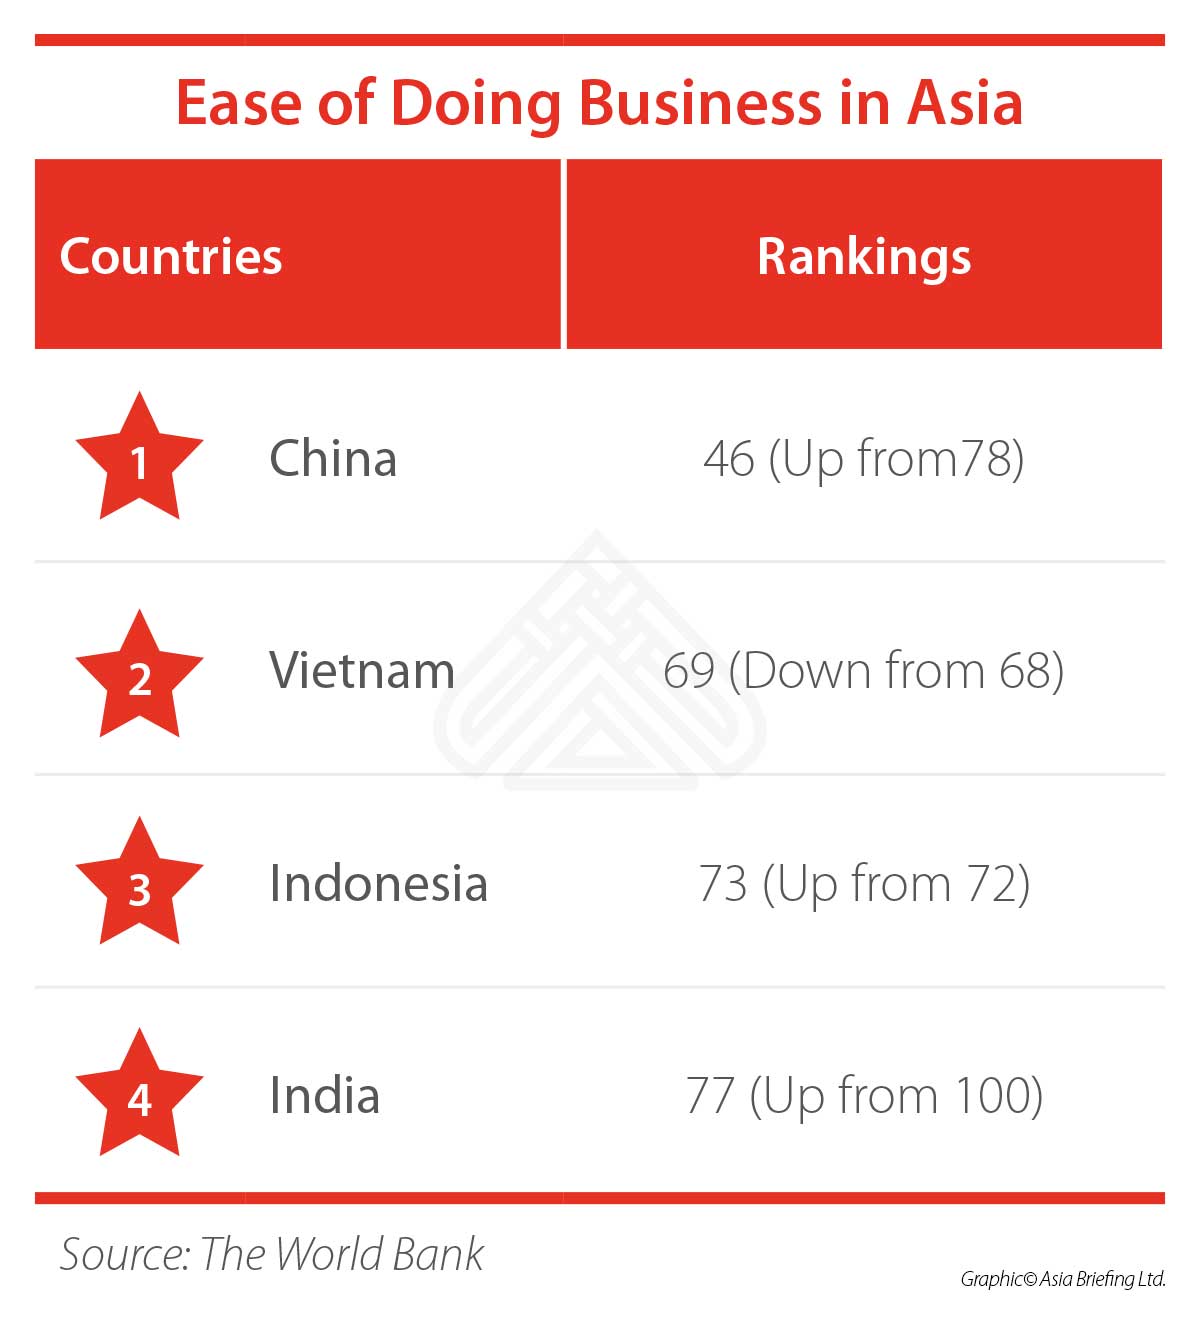 Ease of doing business in Asia